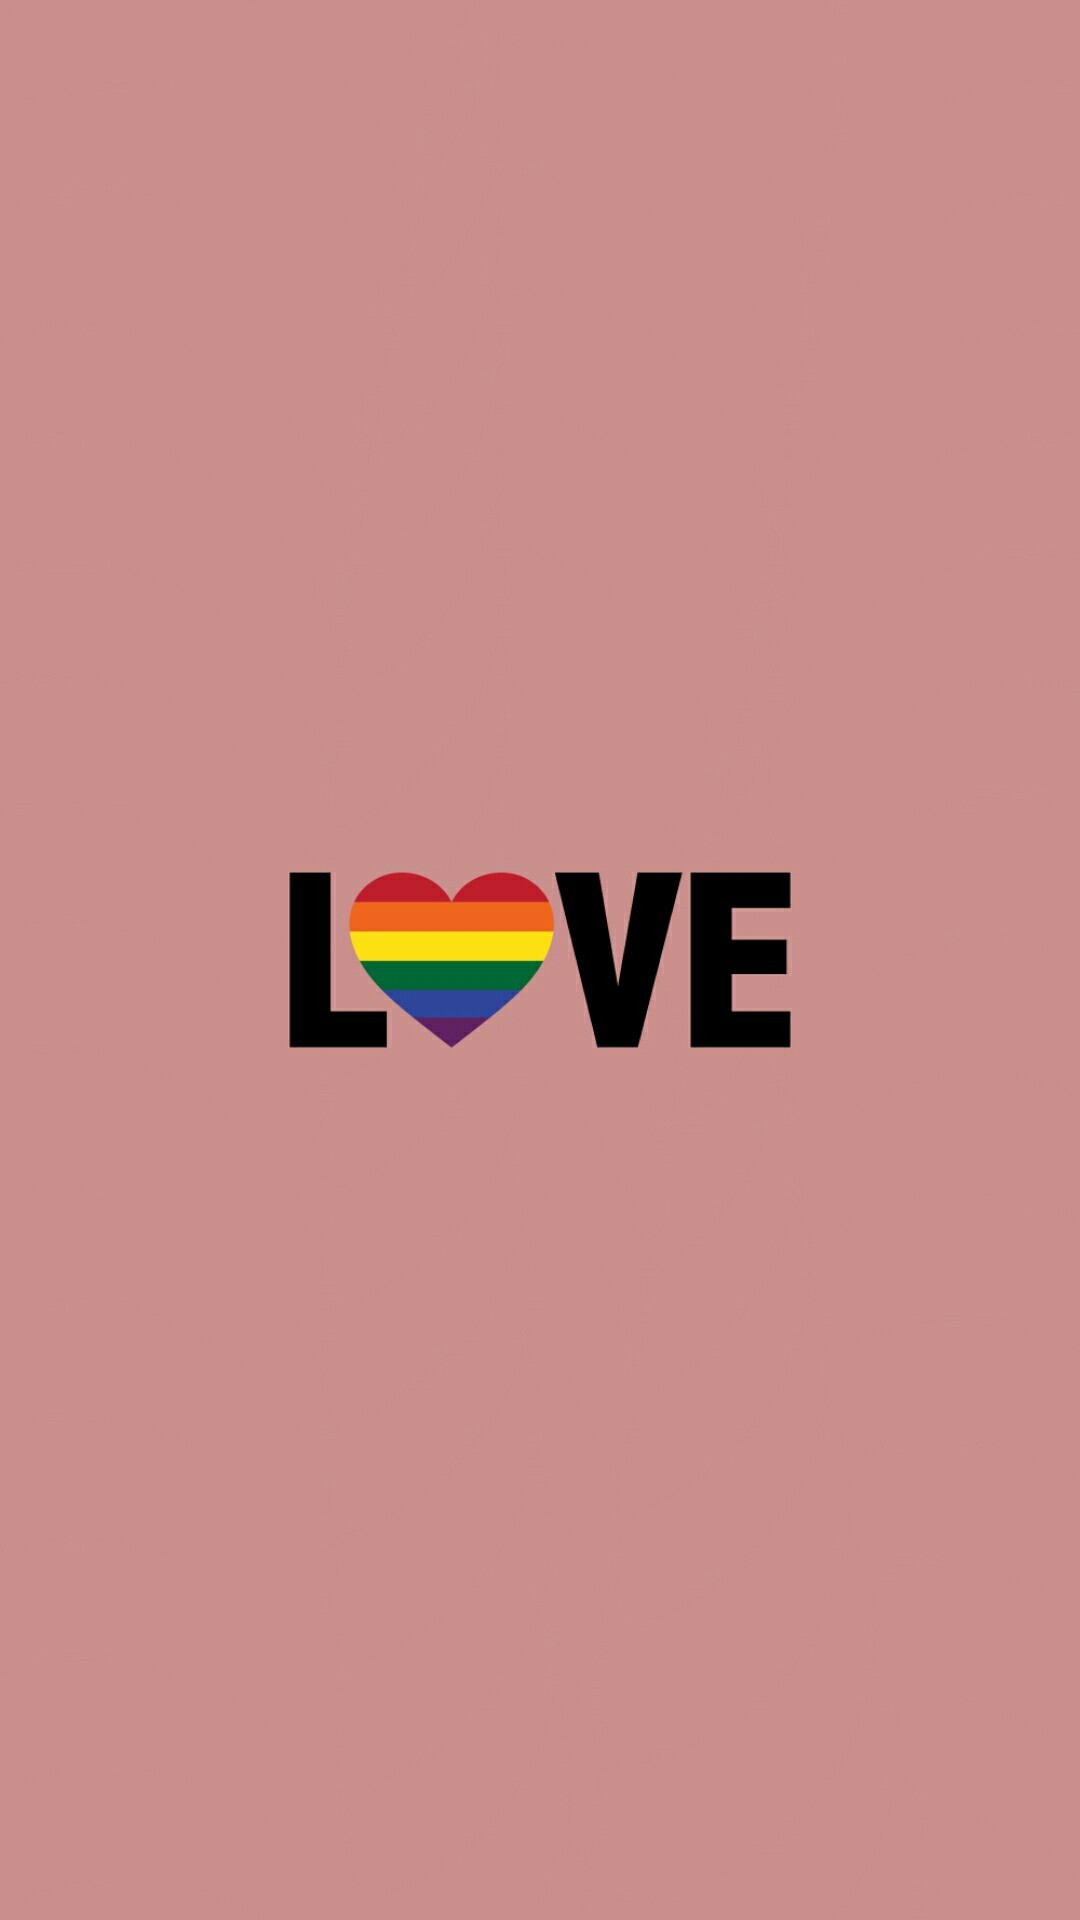 Pride Iphone Wallpaper Images  Free Photos PNG Stickers Wallpapers   Backgrounds  rawpixel